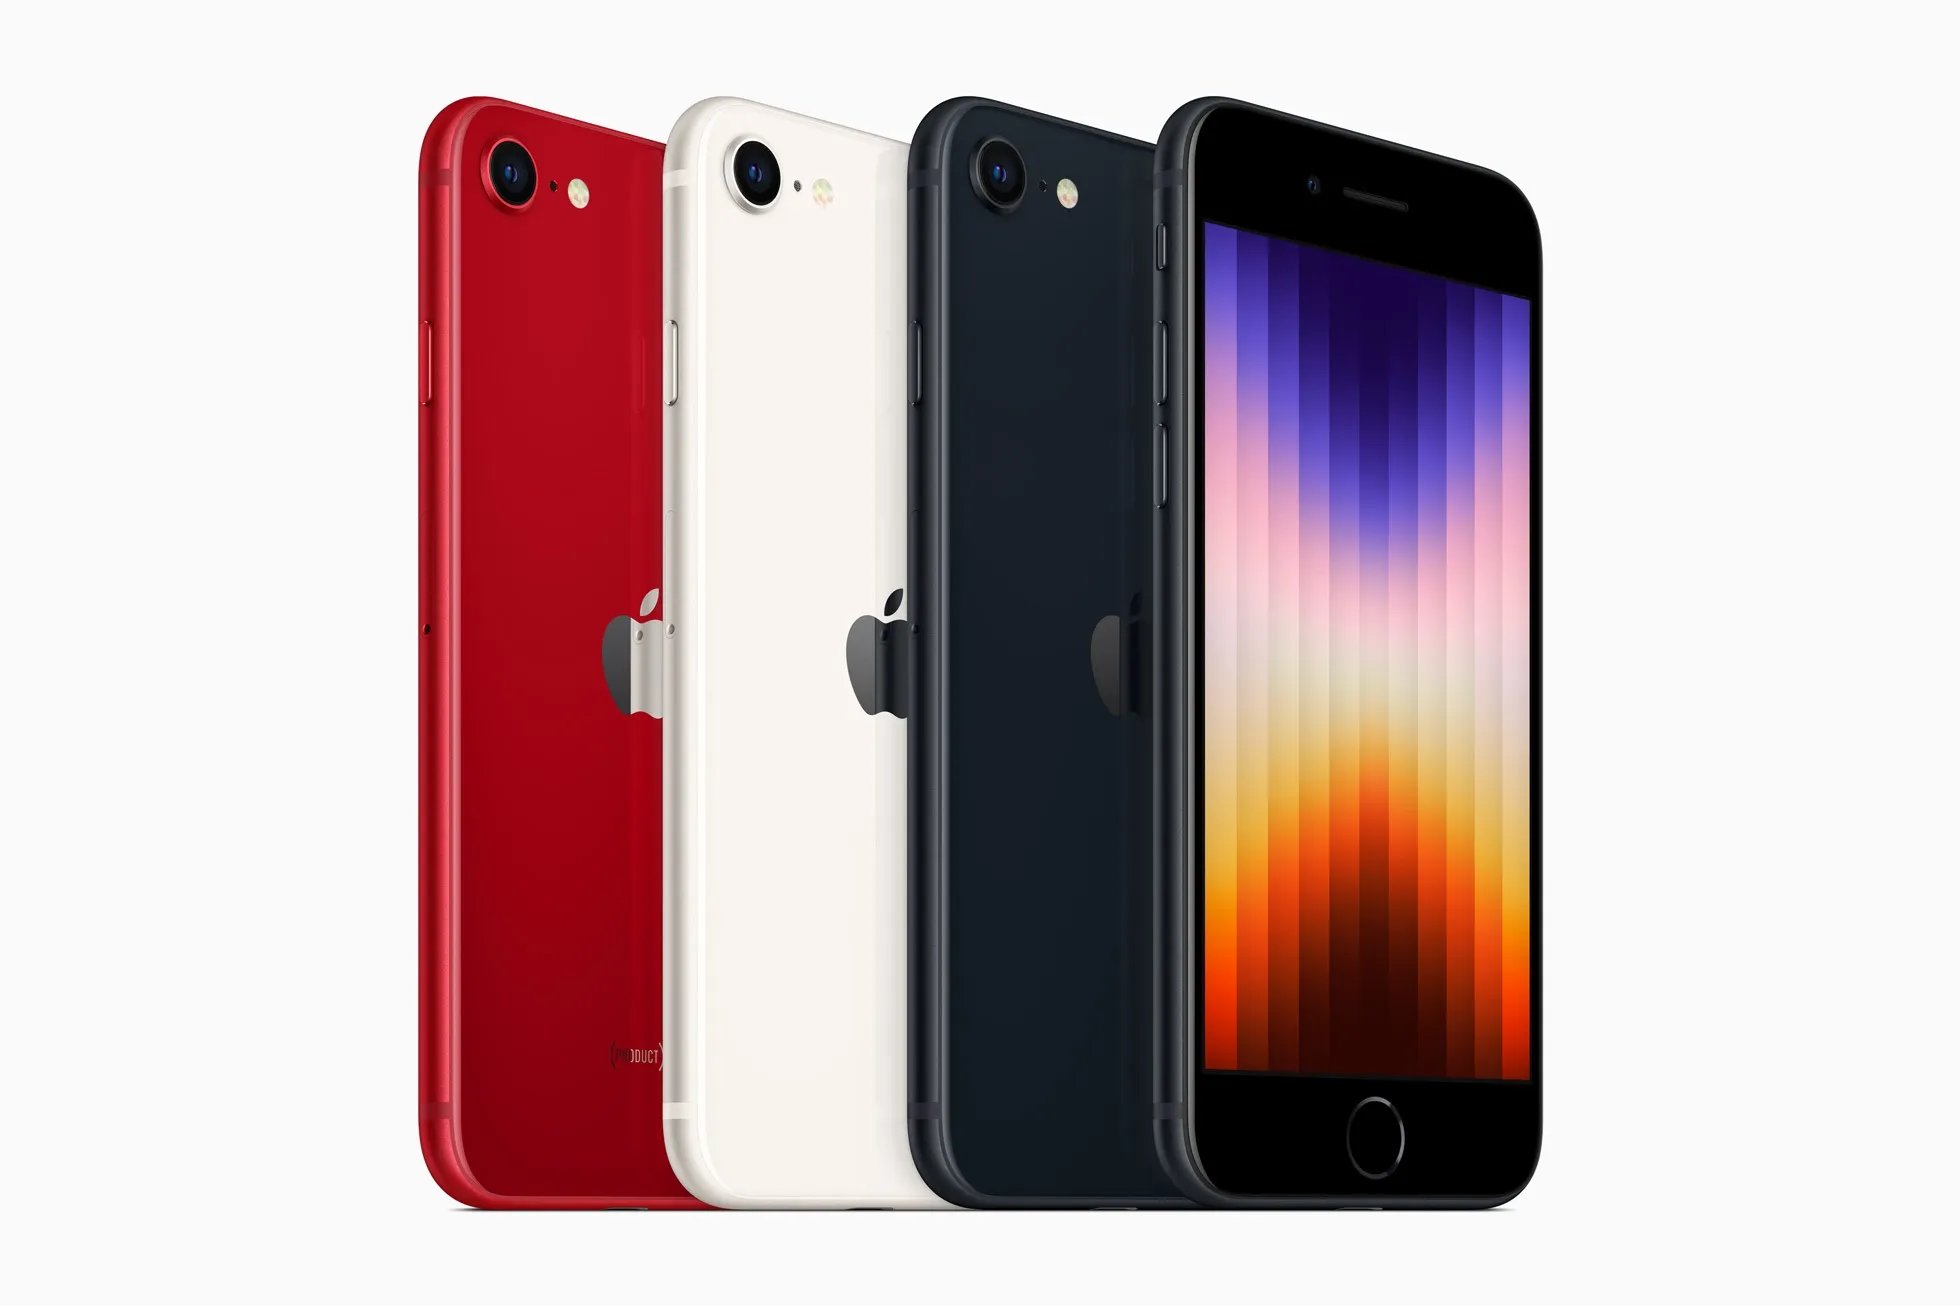 iphone-se-4-could-be-canceled-or-postponed-suggests-kuo